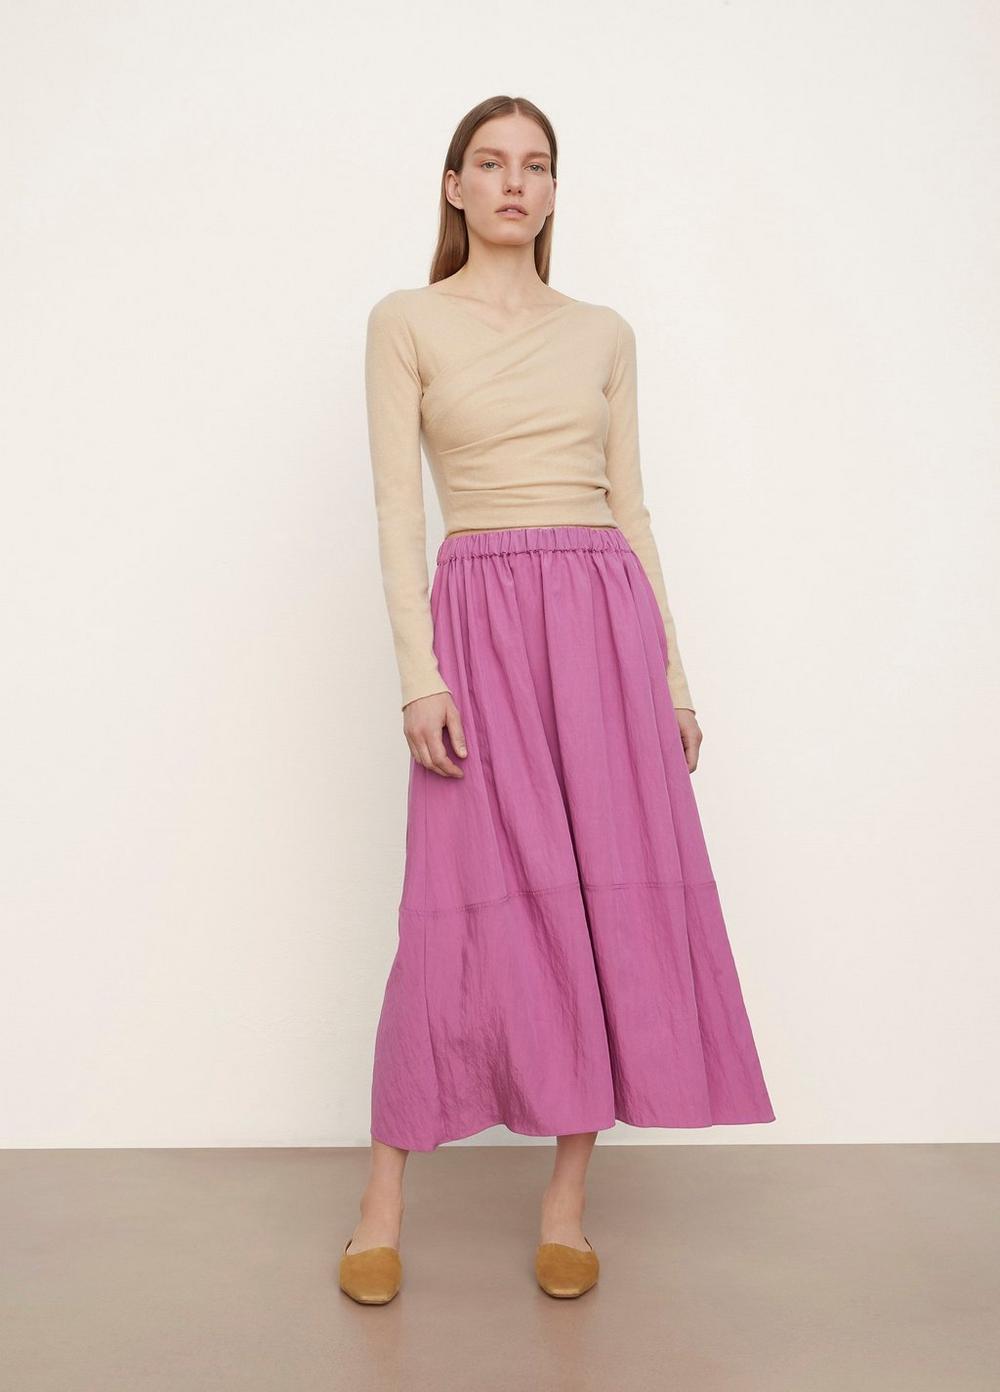 Pull On Tiered Skirt